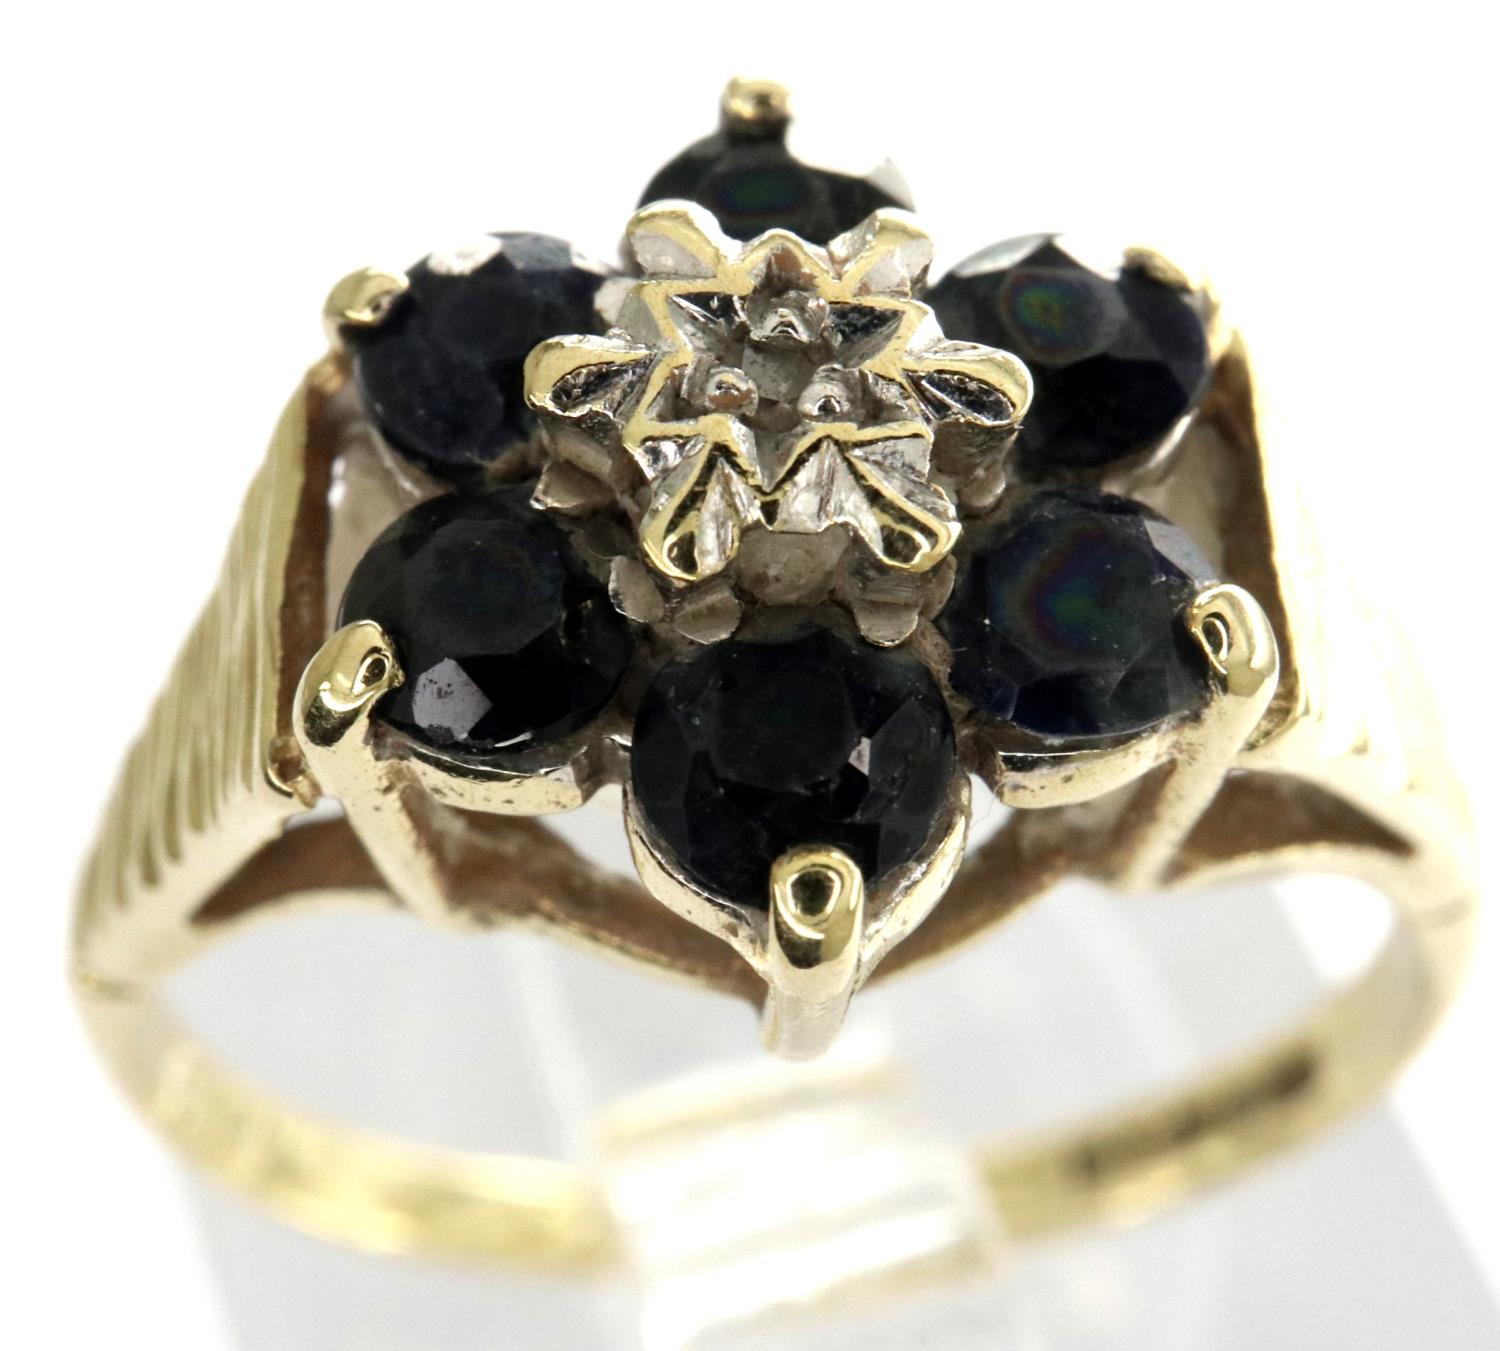 9ct gold flower ring set with sapphires and a central diamond, size L, 1.8g. P&P Group 1 (£14+VAT